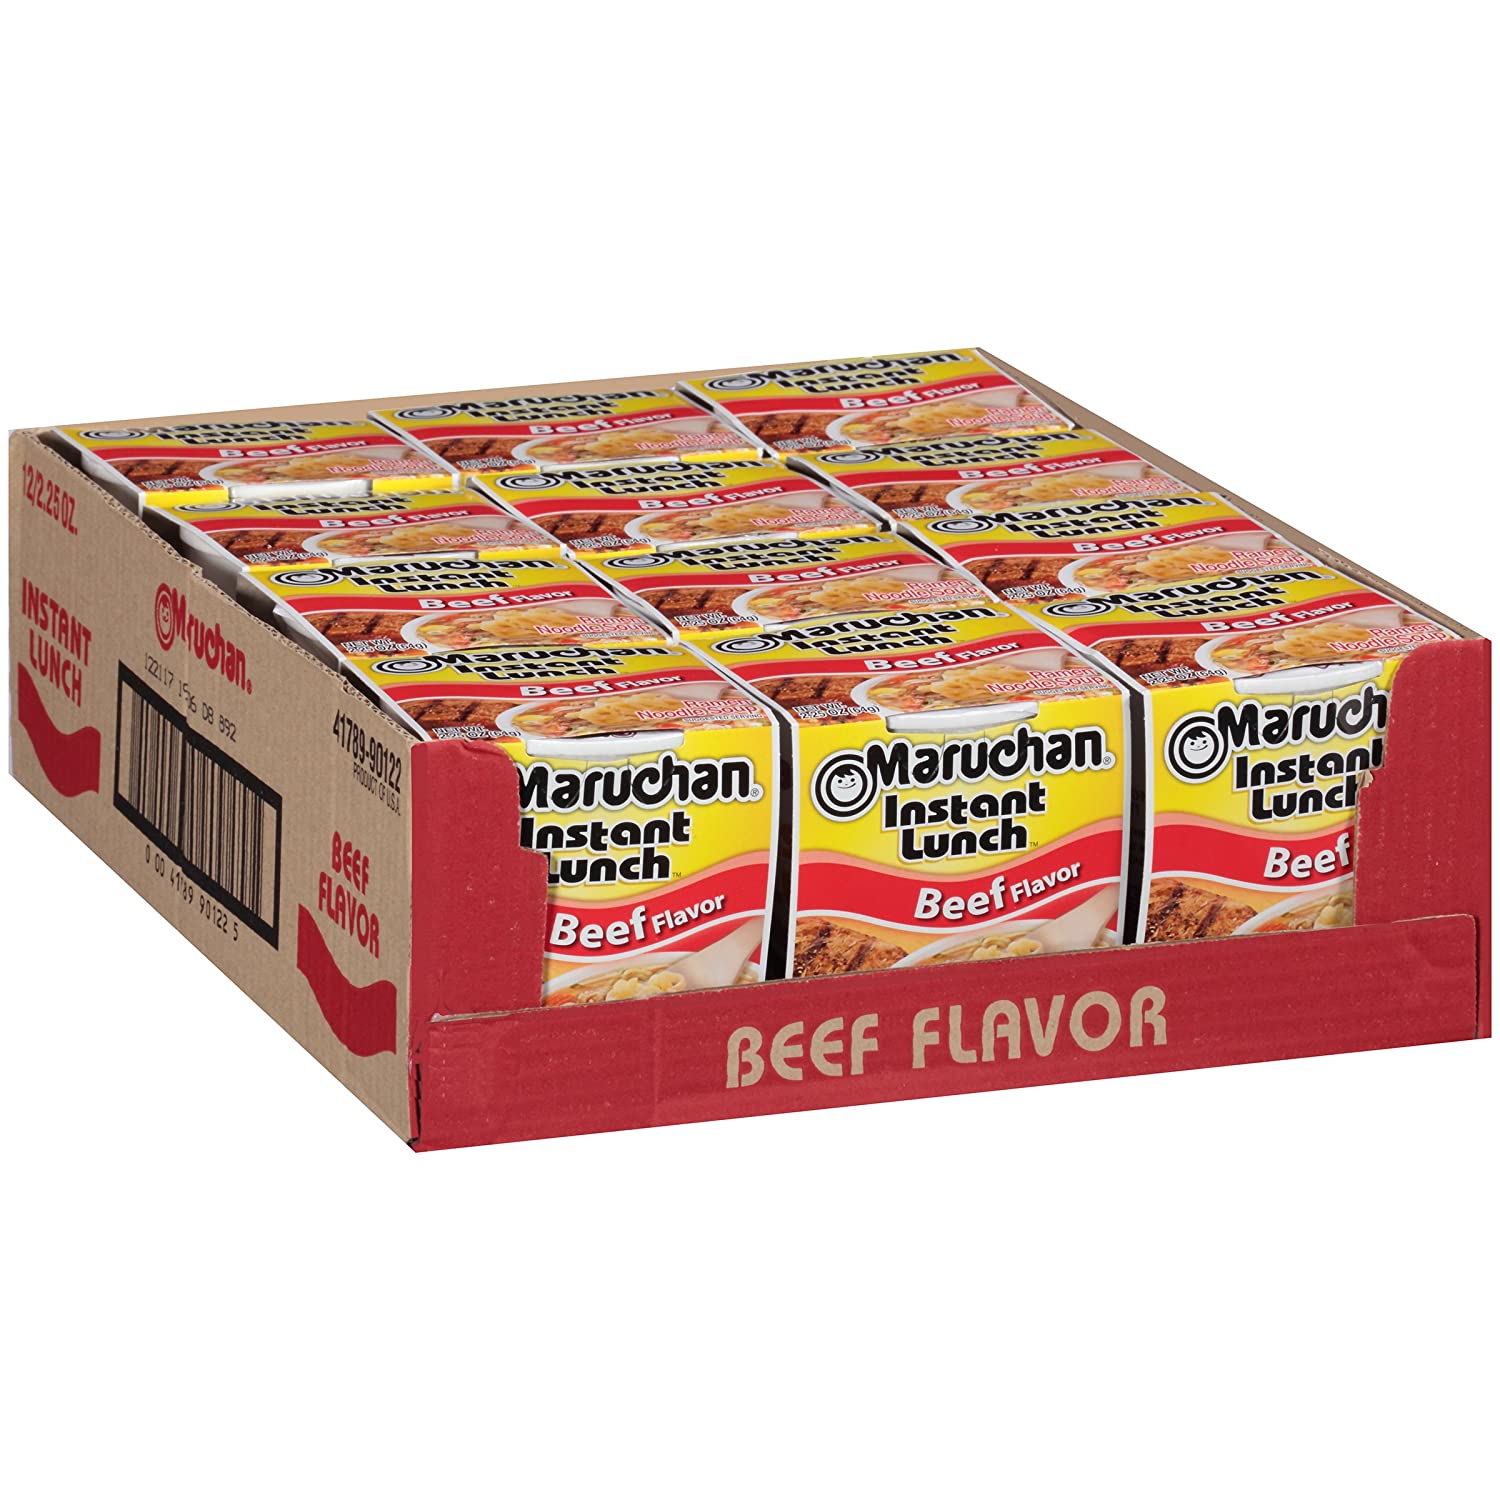 12-Pack 2.25-Oz Maruchan Instant Lunch Noodles (Beef) $4.62 & Free S&H w/ Prime or $25+